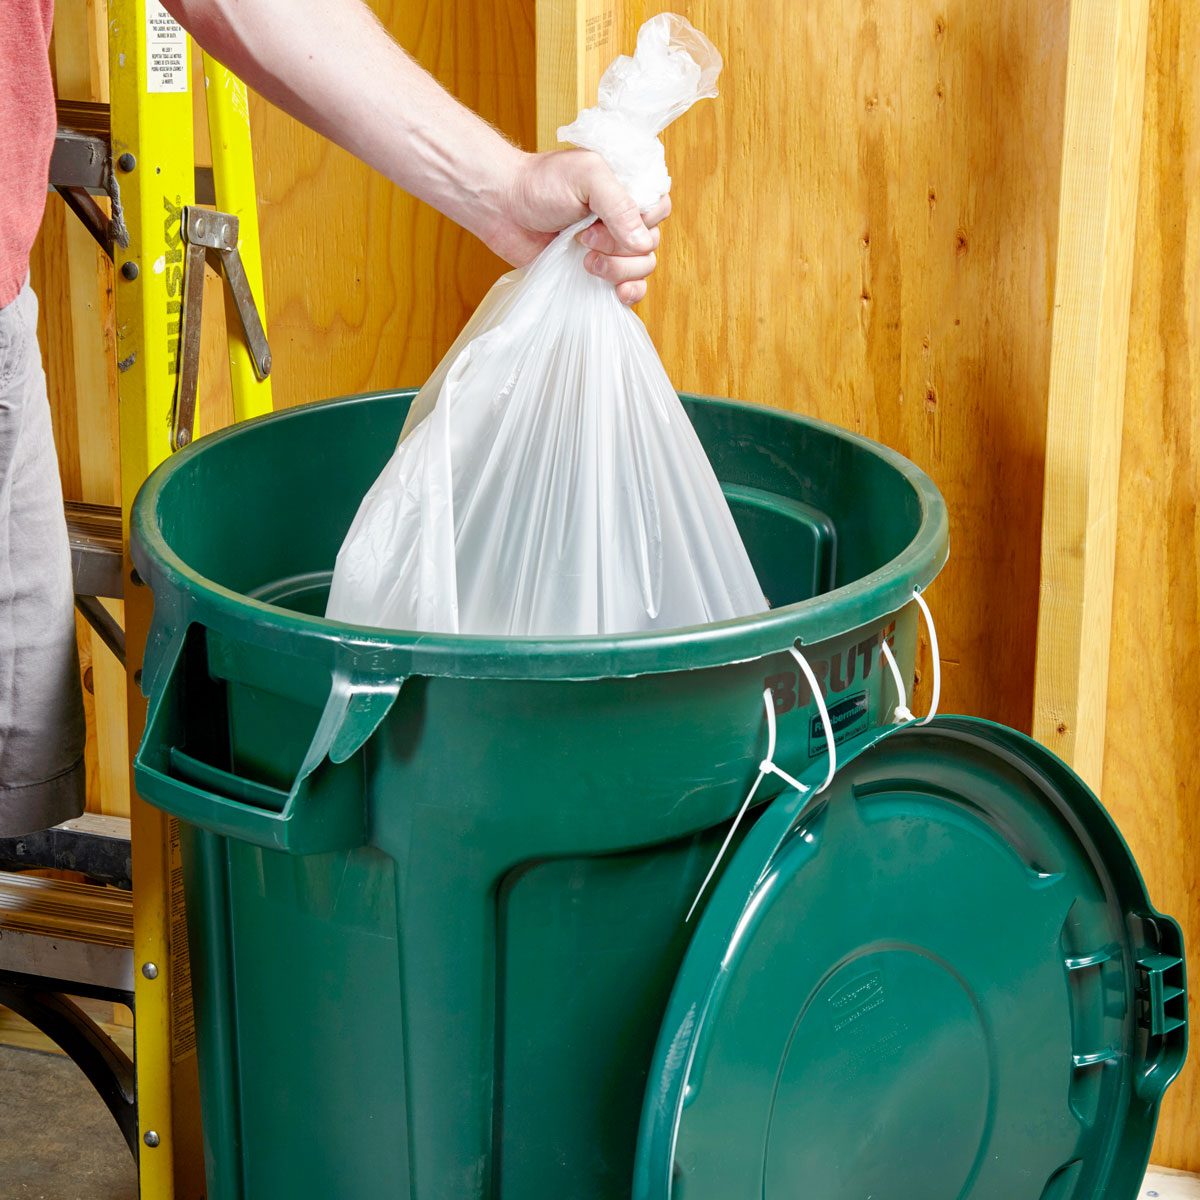 man placing a bag of trash in a green trash can with the lid attached with two zip ties in a garage setting